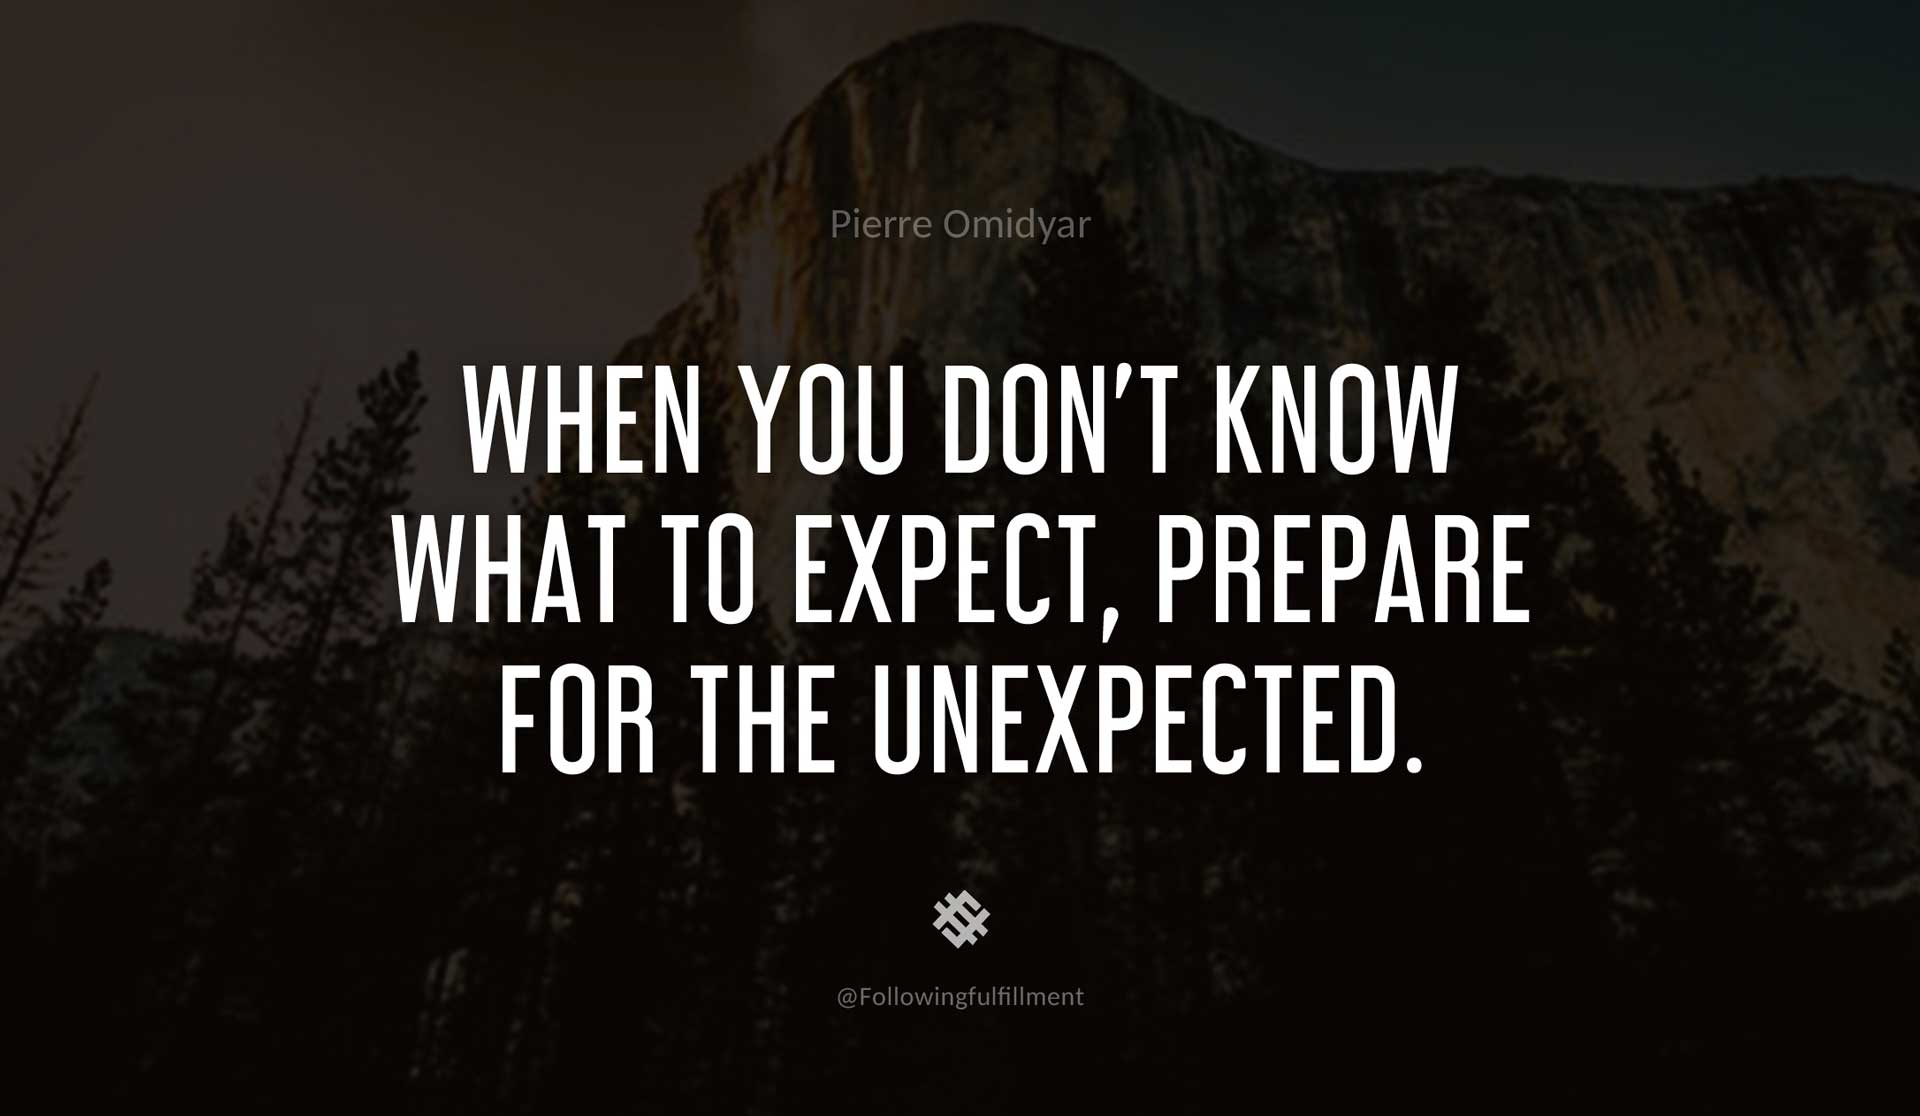 When-you-don't-know-what-to-expect,-prepare-for-the-unexpected.-PIERRE-OMIDYAR-Quote.jpg